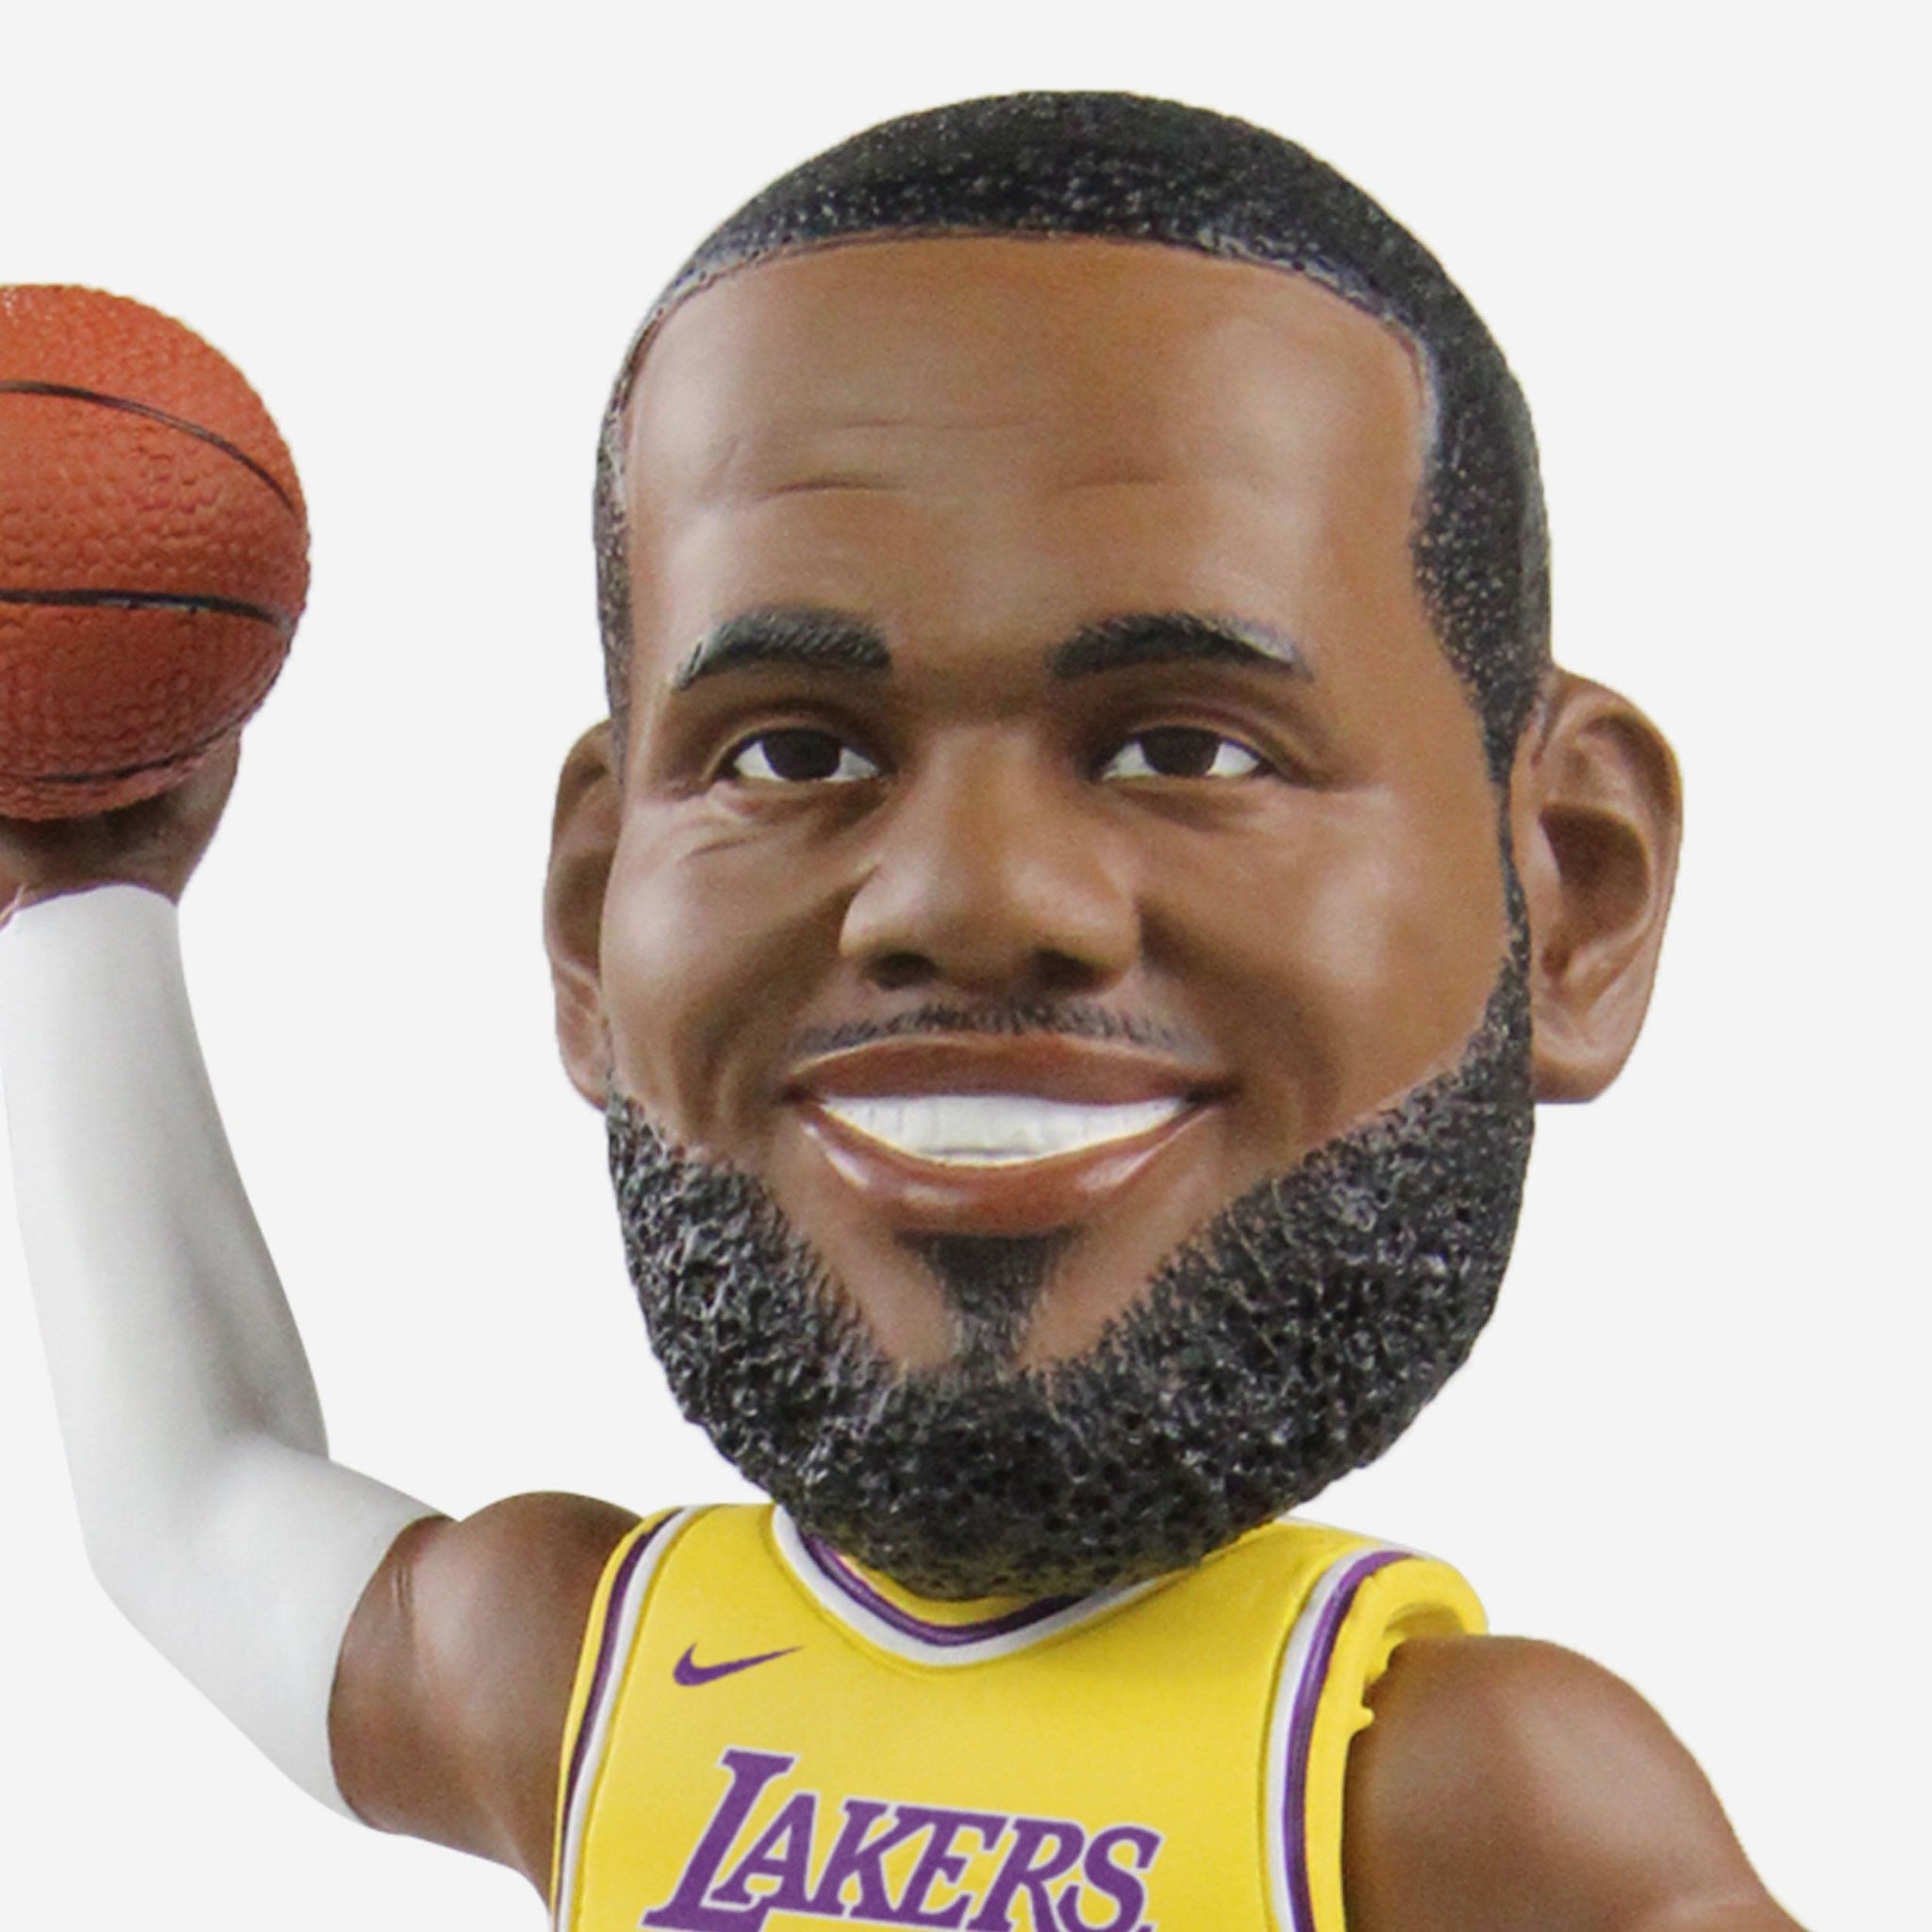 FOCO Selling LeBron James Bobblehead In Lakers Statement Jersey